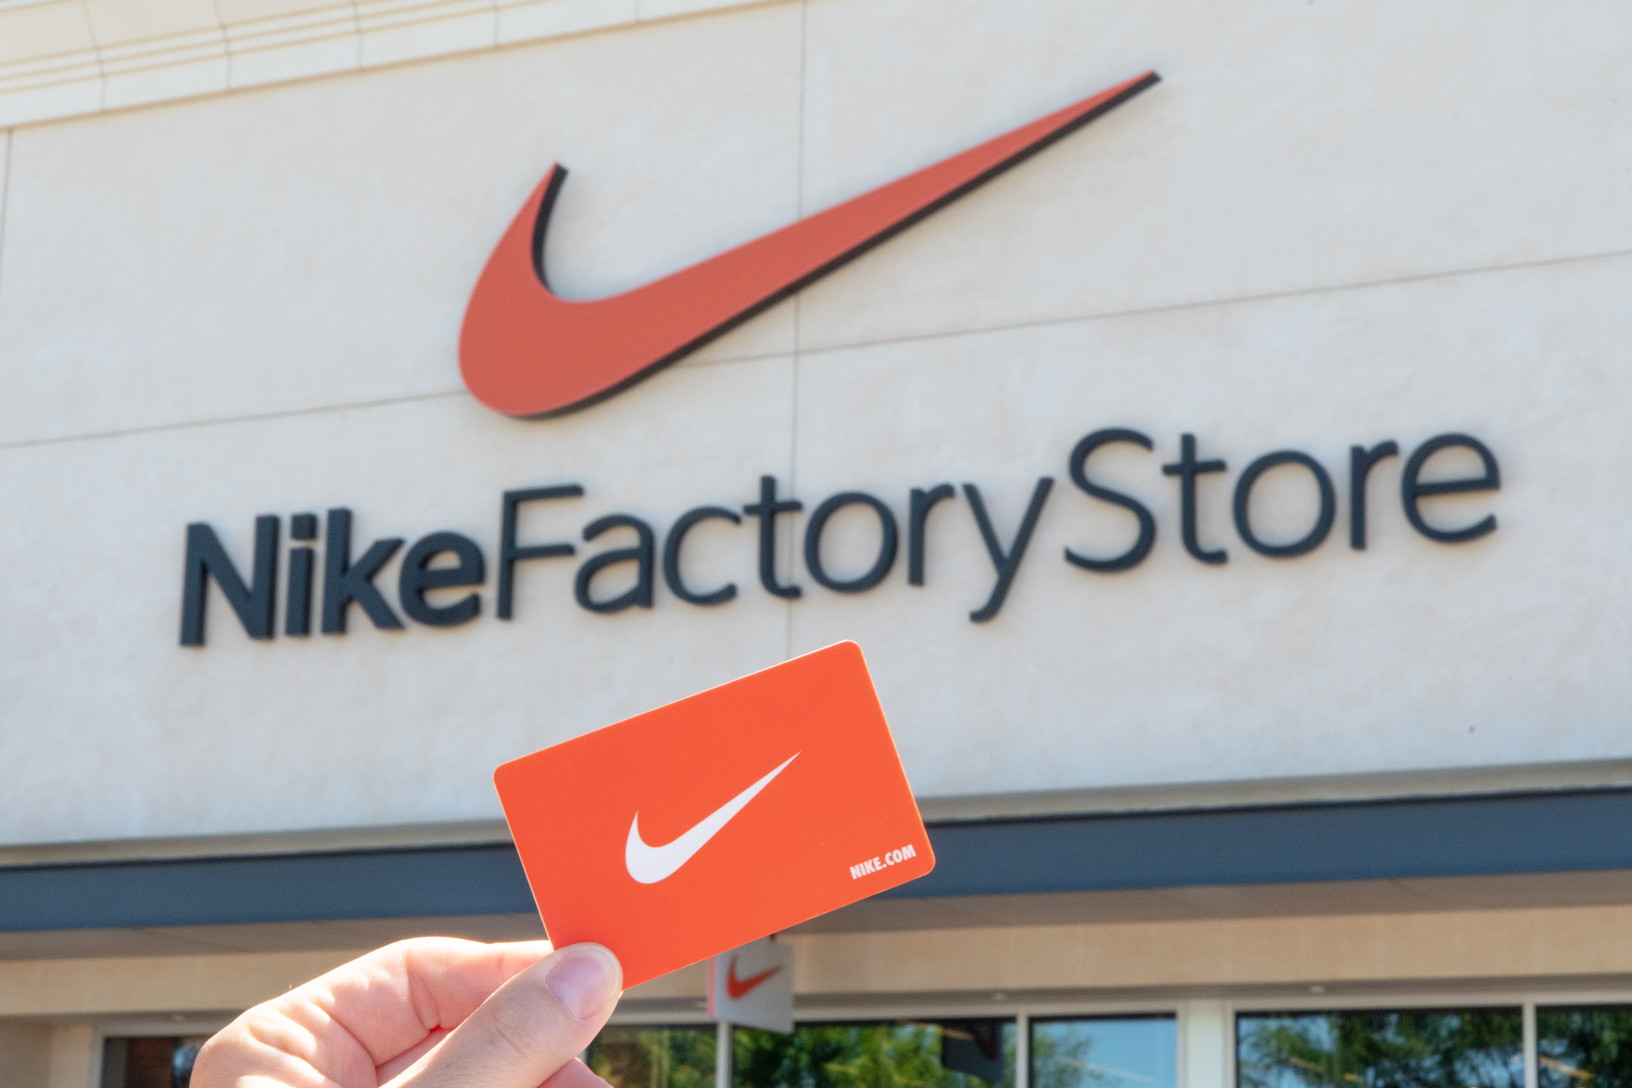 33 Insanely Smart Nike Factory Store 